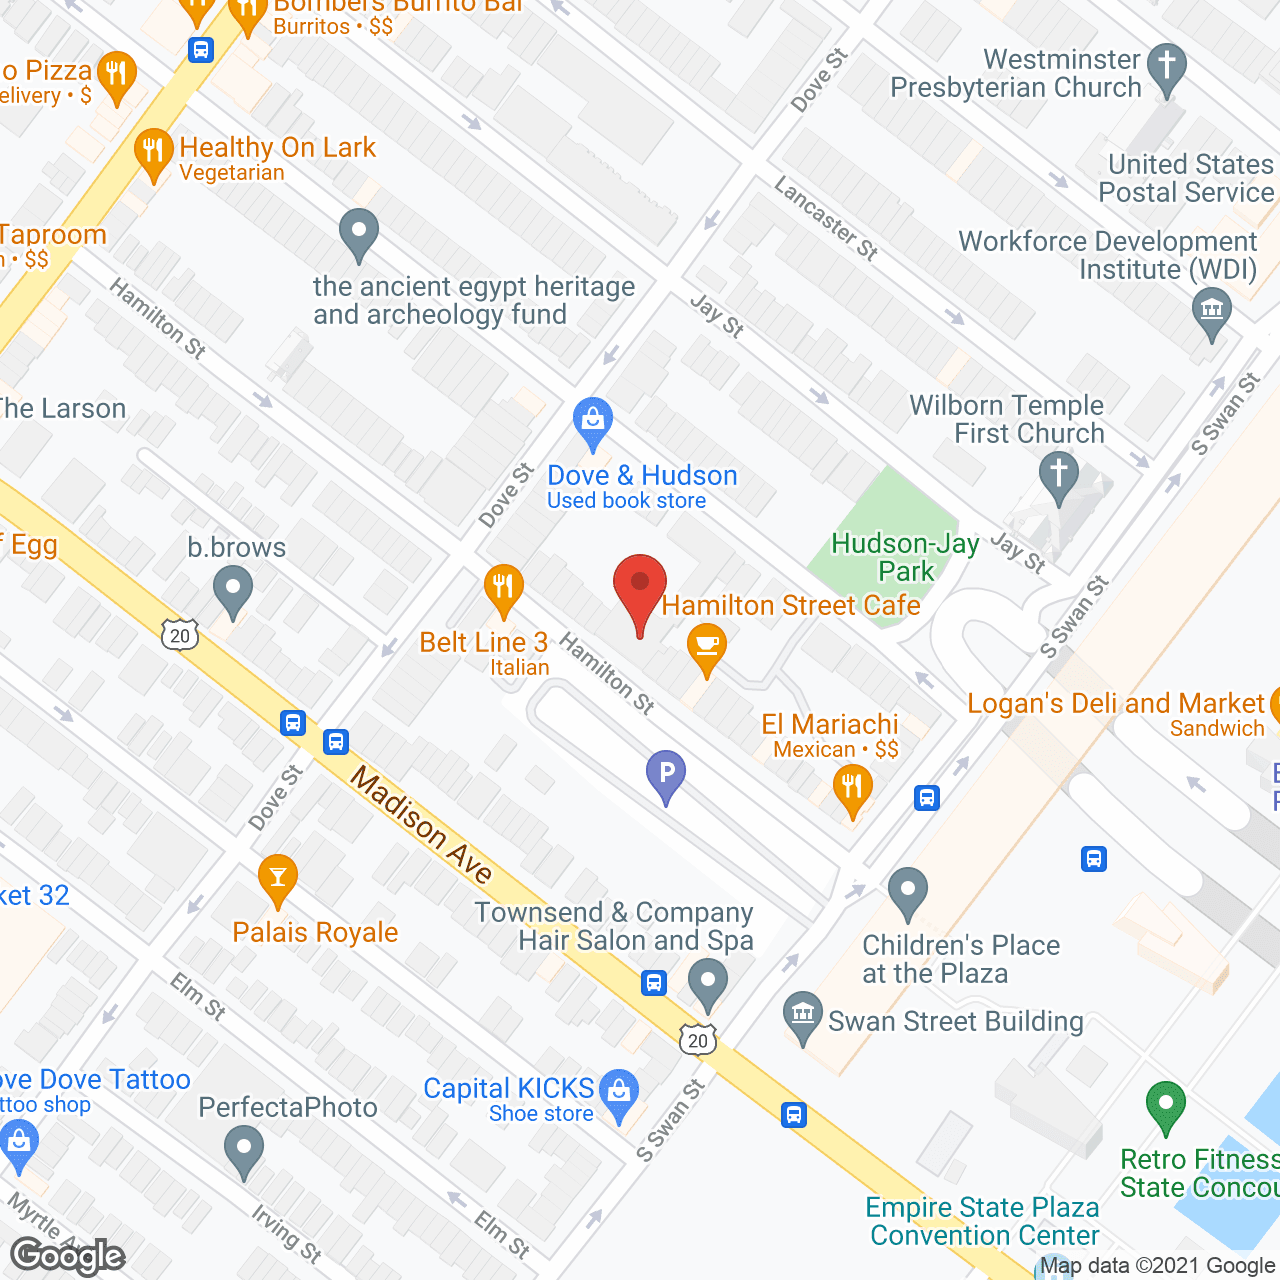 Robinson Square Apartments in google map